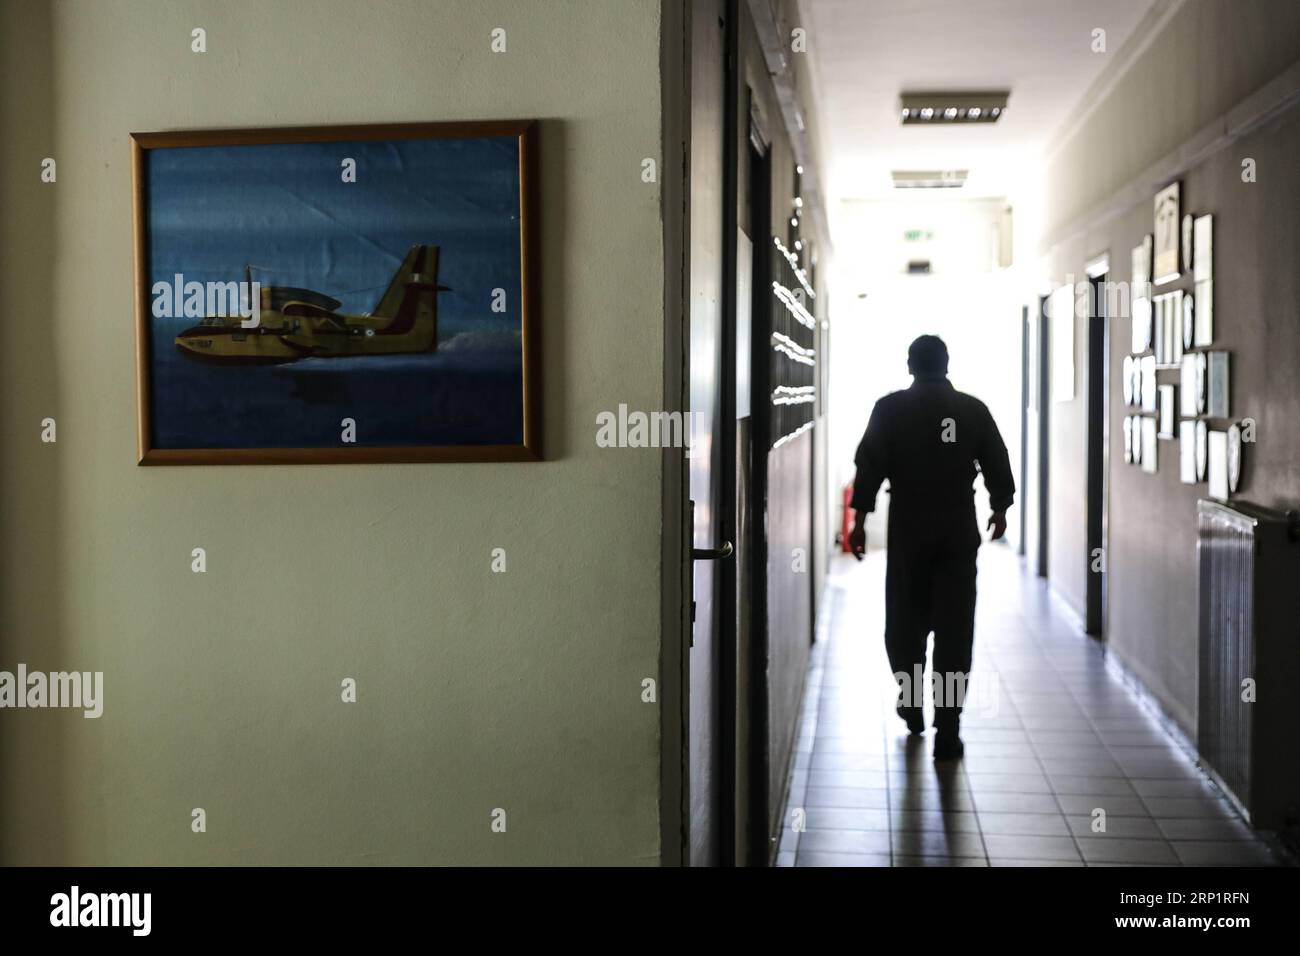 (180721) -- ATHENS, July 21, 2018 -- Operations officer Fotis Gavrilis walks in the building of 355 Tactical Transport Squadron at Elefsina Air Base, Athens, Greece, on July 20, 2018. The 355 Tactical Transport Squadron was established in 1947 to fight wildfires. ) (zcc) GREECE-ATHENS-FIREFIGHTING SQUADRON LefterisxPartsalis PUBLICATIONxNOTxINxCHN Stock Photo